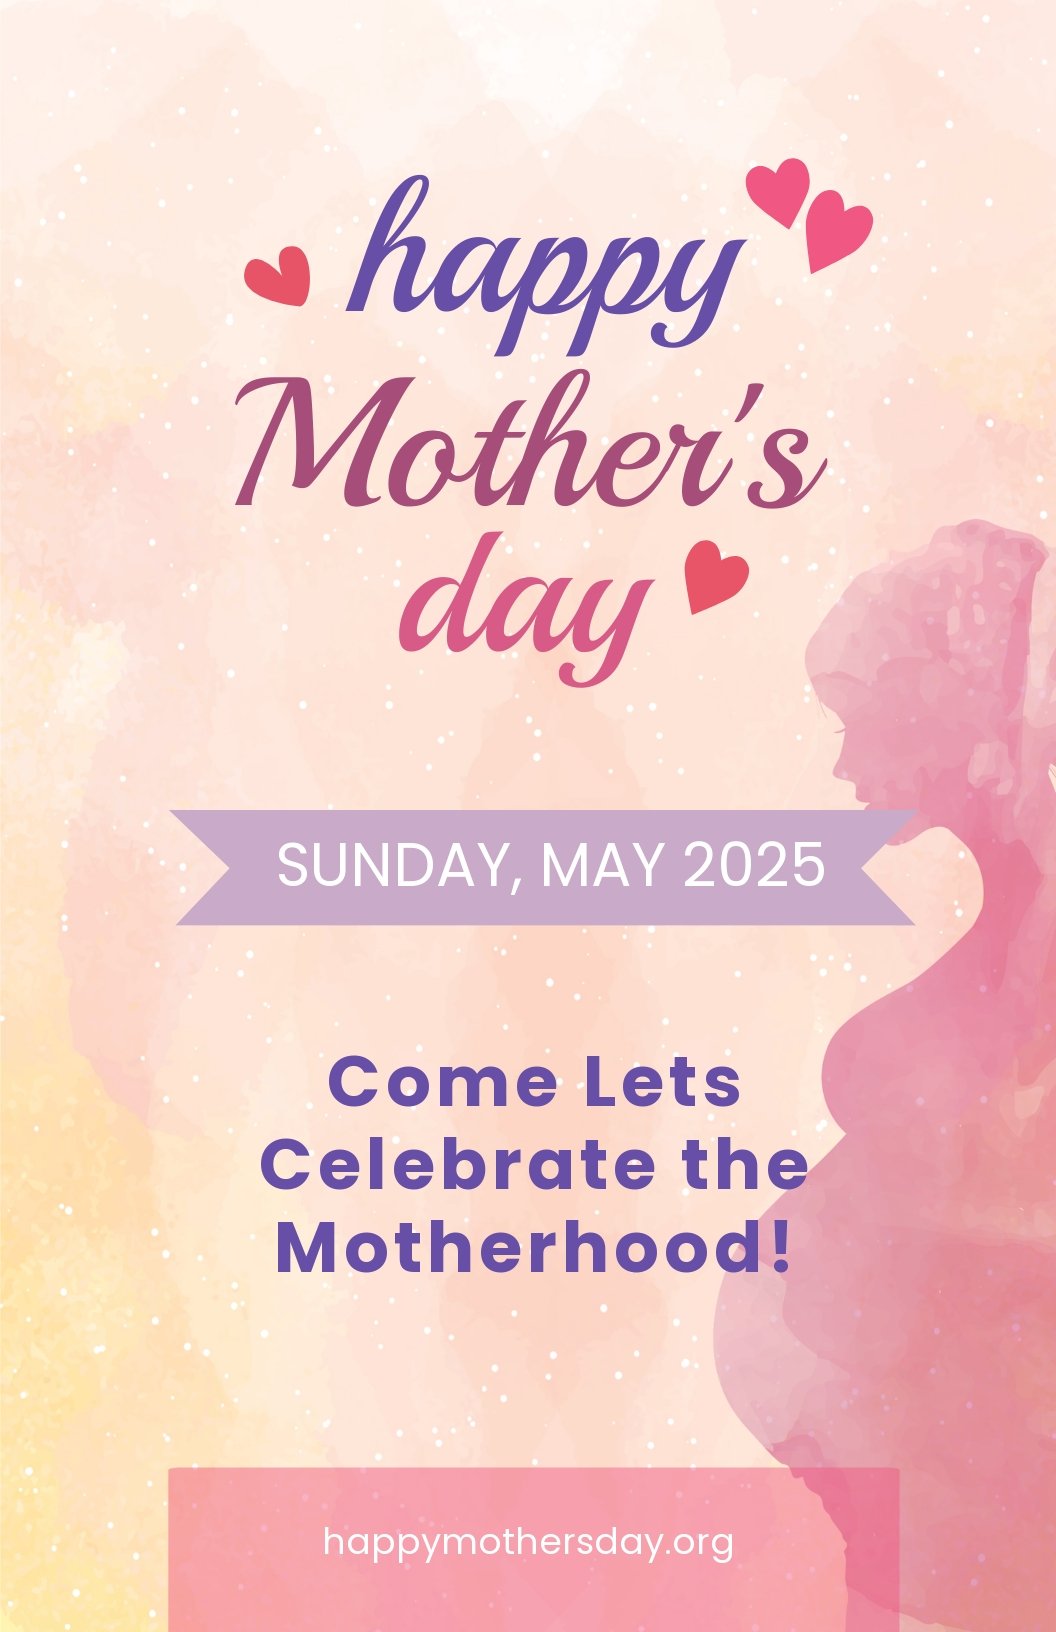 43+ FREE Mothers Day Templates, Ideas, Designs 2021